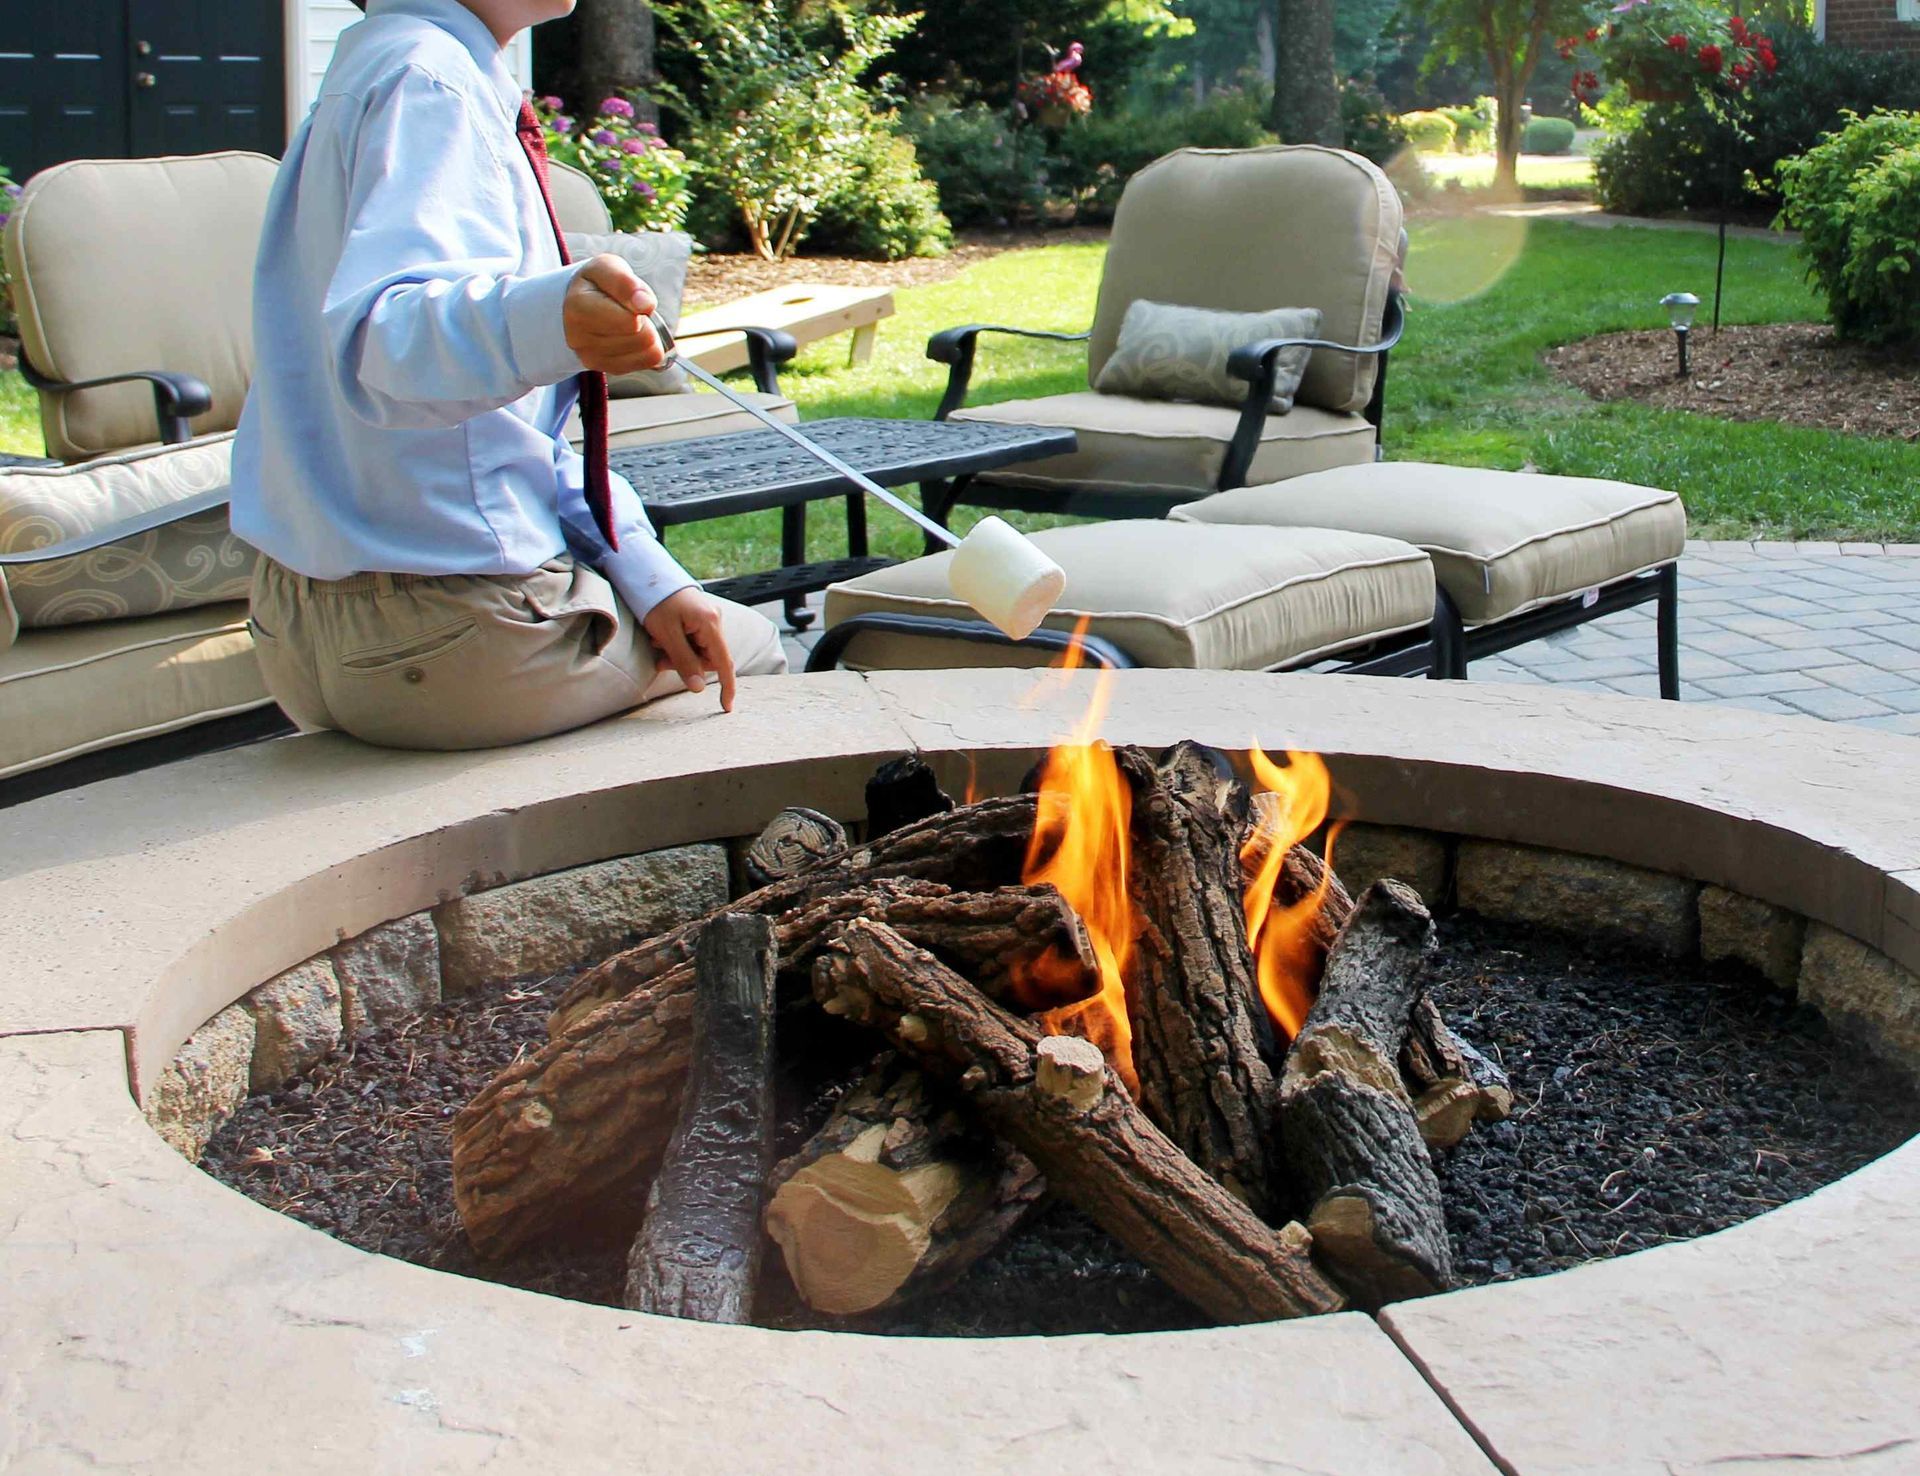 Roasting Marshmallows Over an Affordable Backyard Fire Pit Made from Brick and Stone